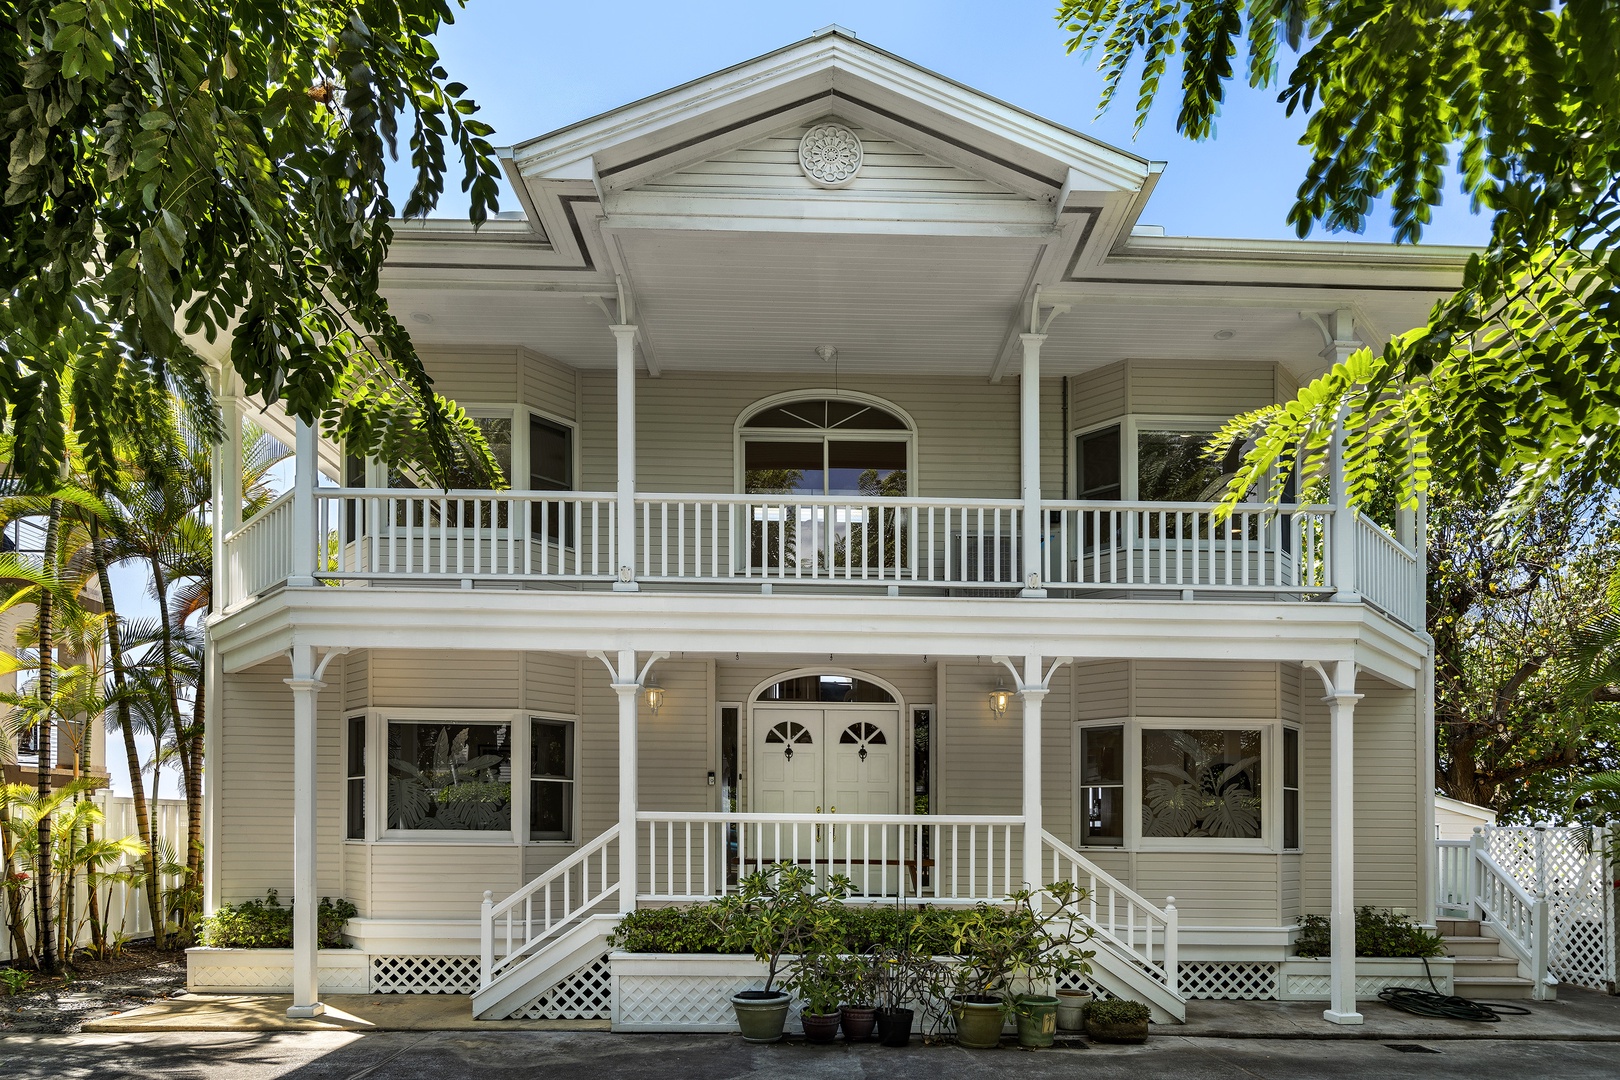 Kailua Kona Vacation Rentals, Dolphin Manor - From the street the Plantation styling draws you in